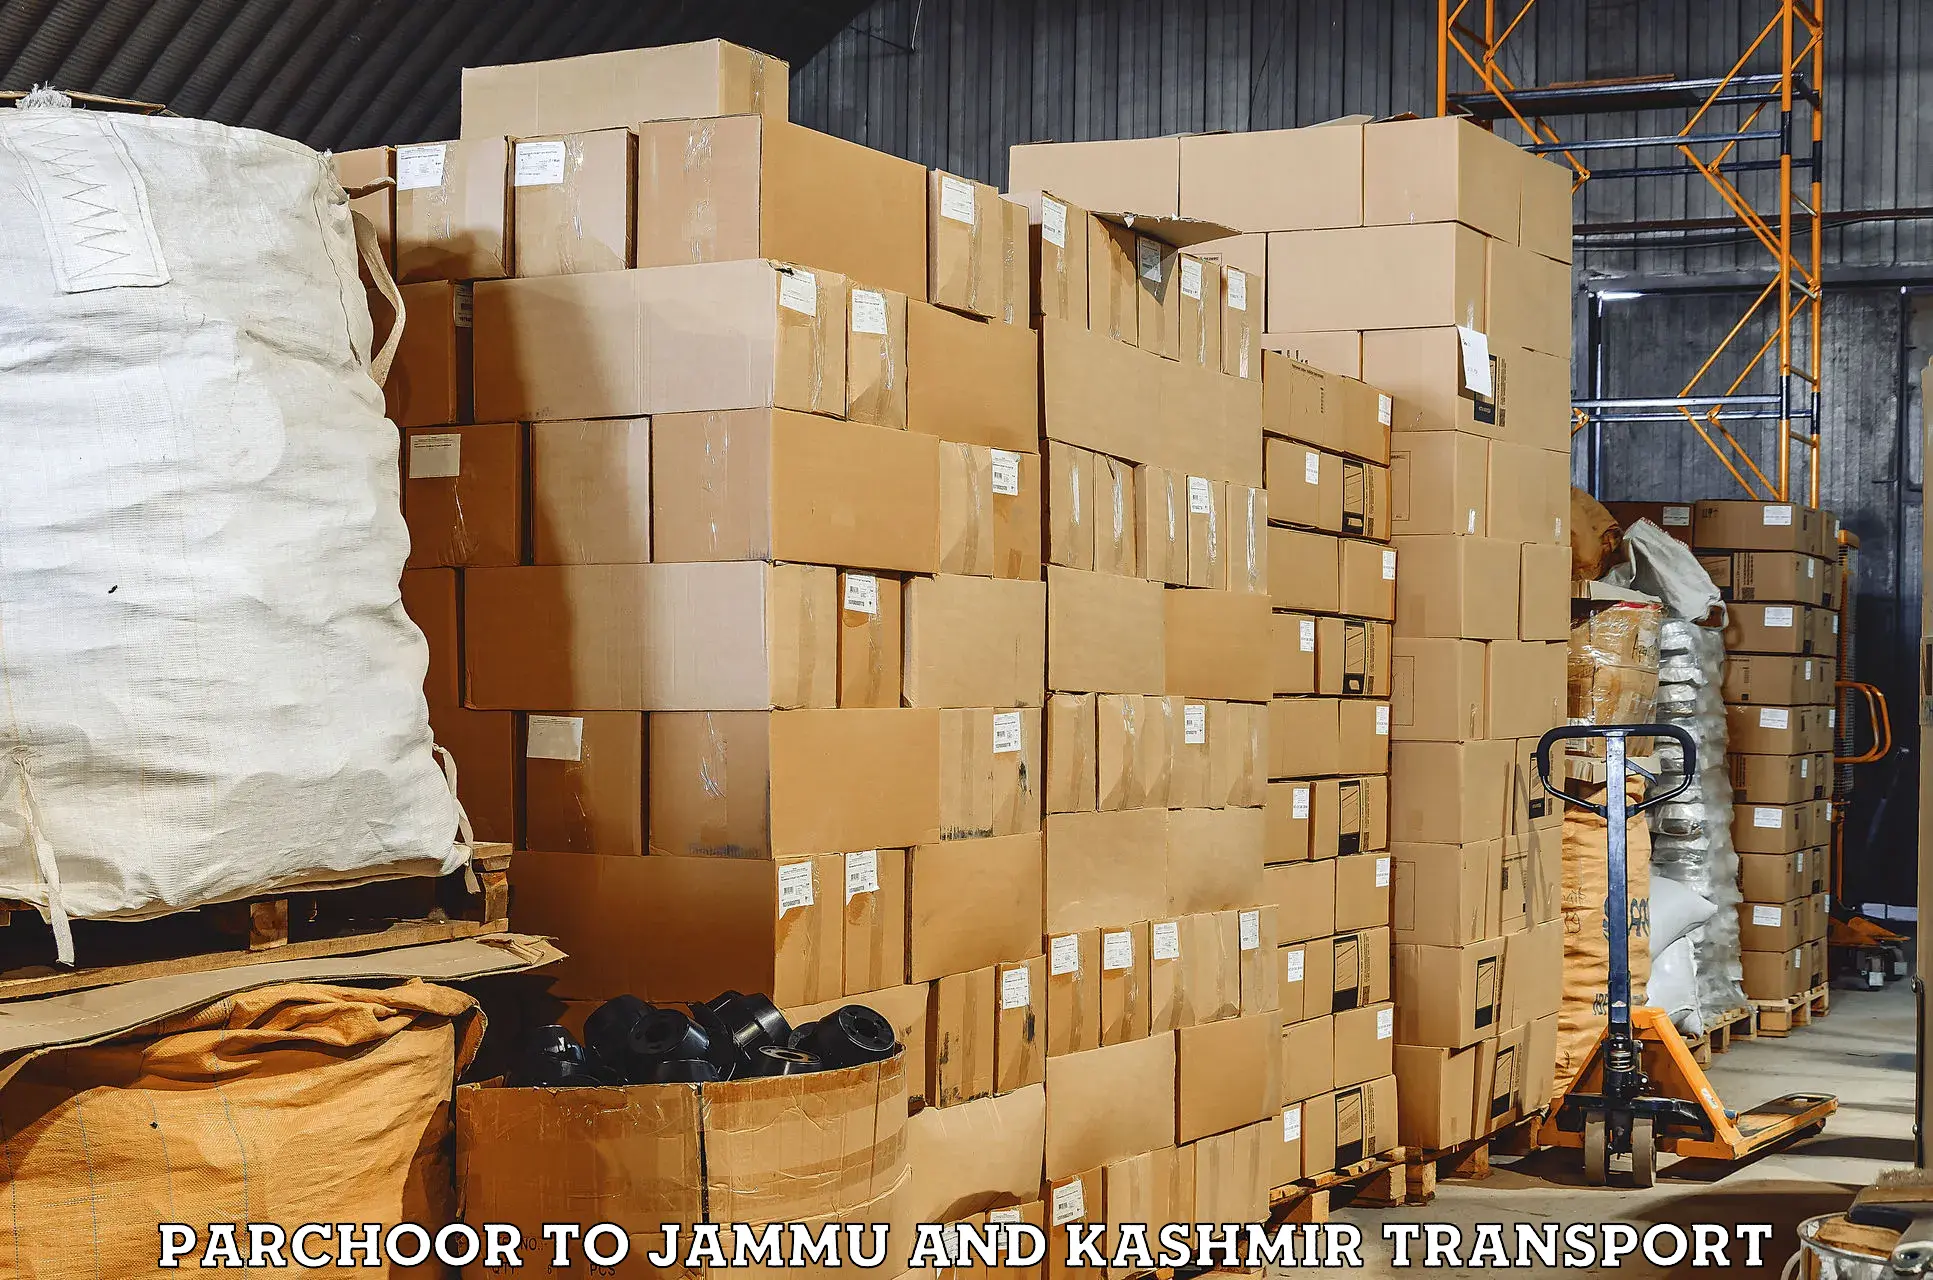 Daily parcel service transport Parchoor to Reasi